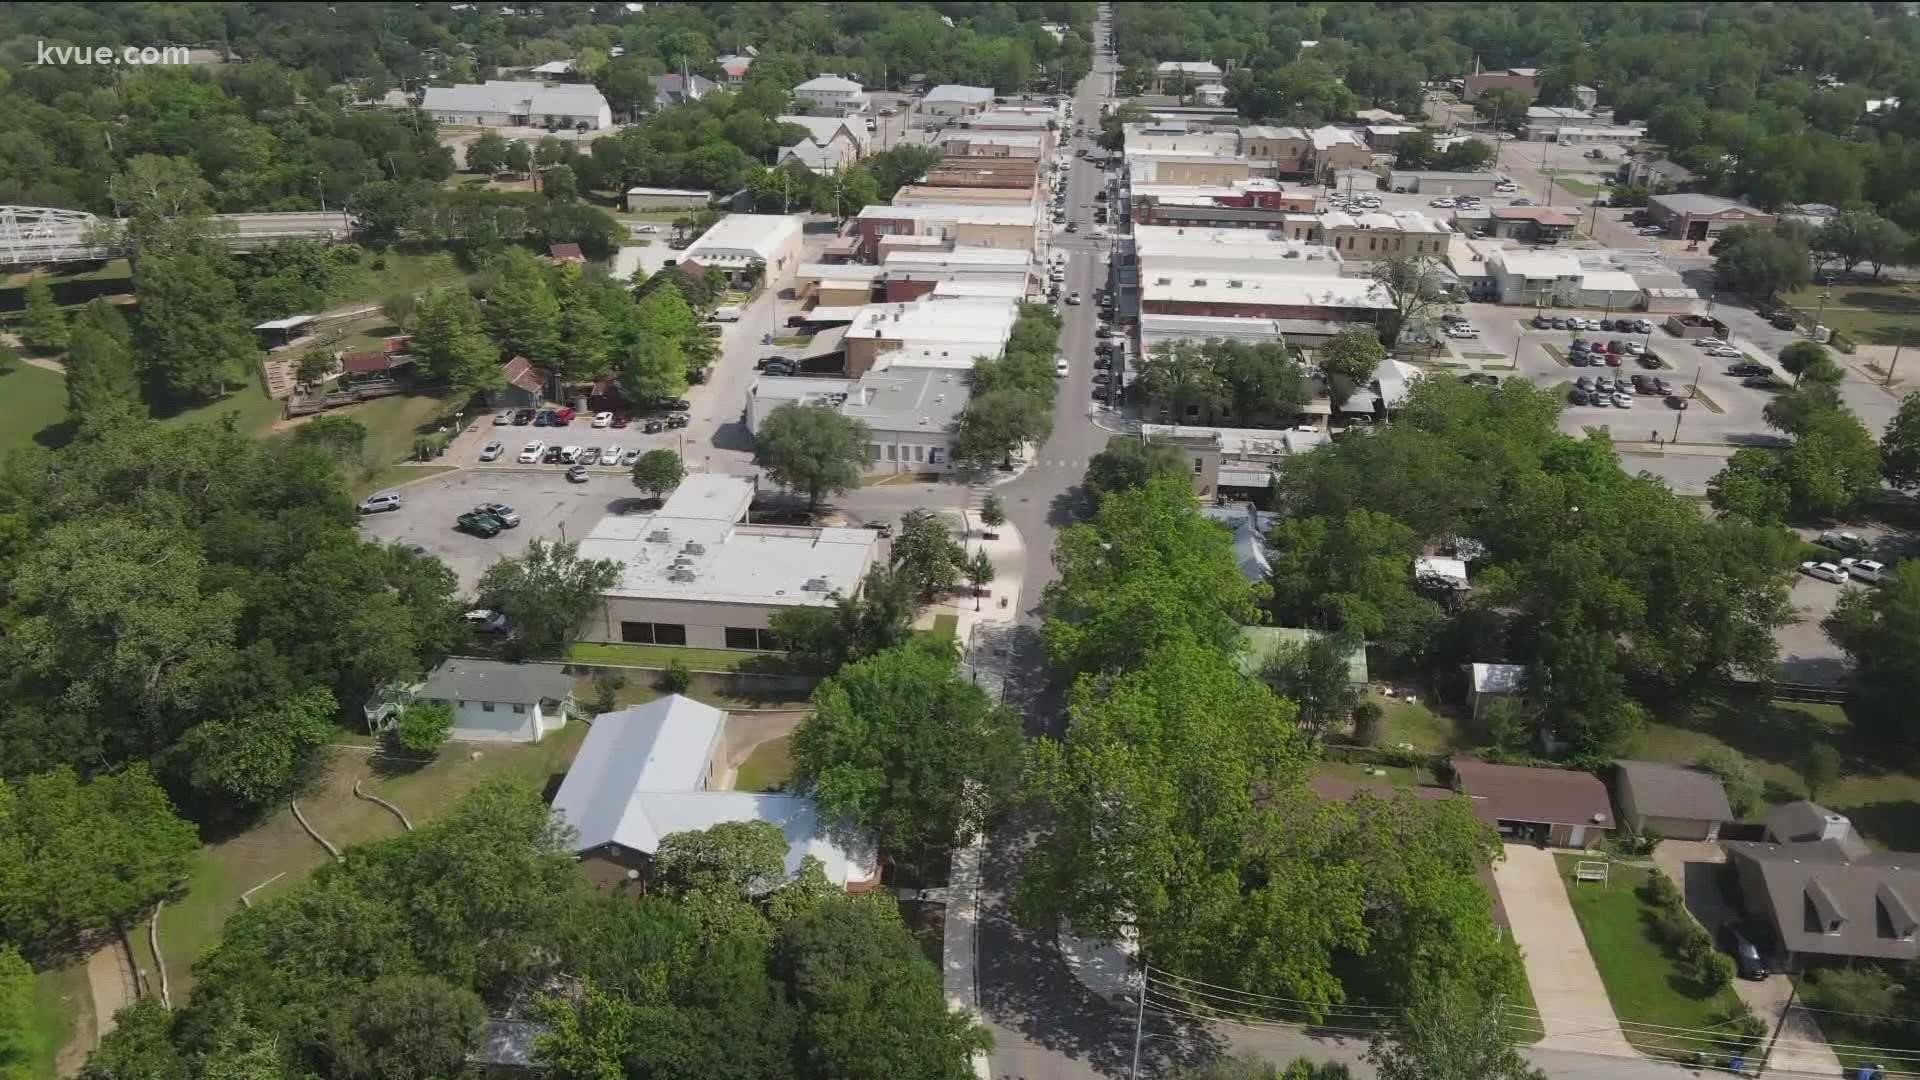 Many people are looking to areas outside of Austin for housing as prices skyrocket. While it might be cheaper, areas like Bastrop are also jumping.